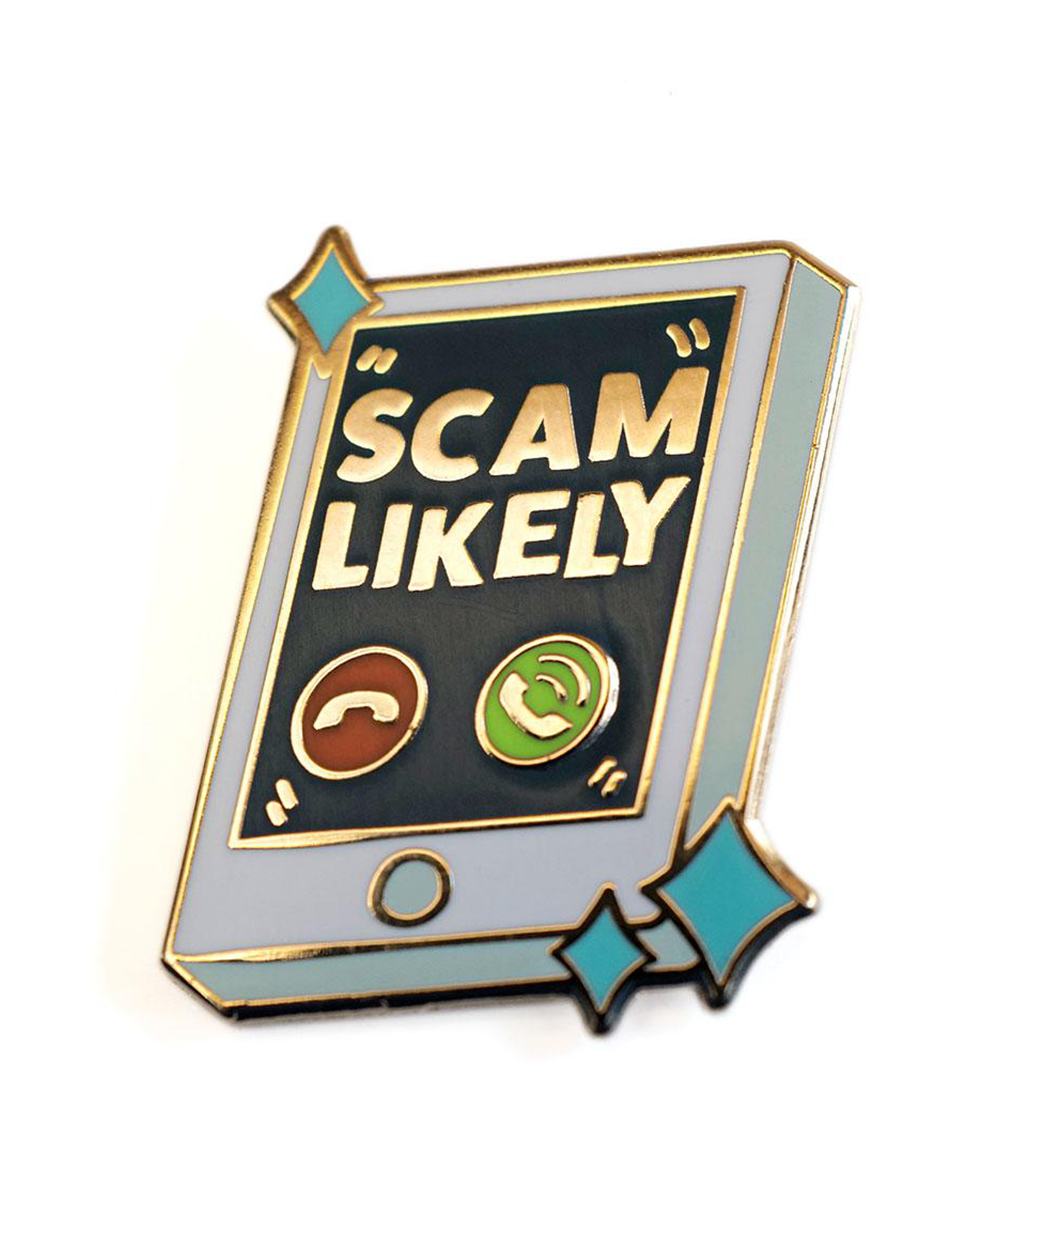 Gold enamel pin of a phone ringing with the caller ID in gold saying "SCAM LIKELY"